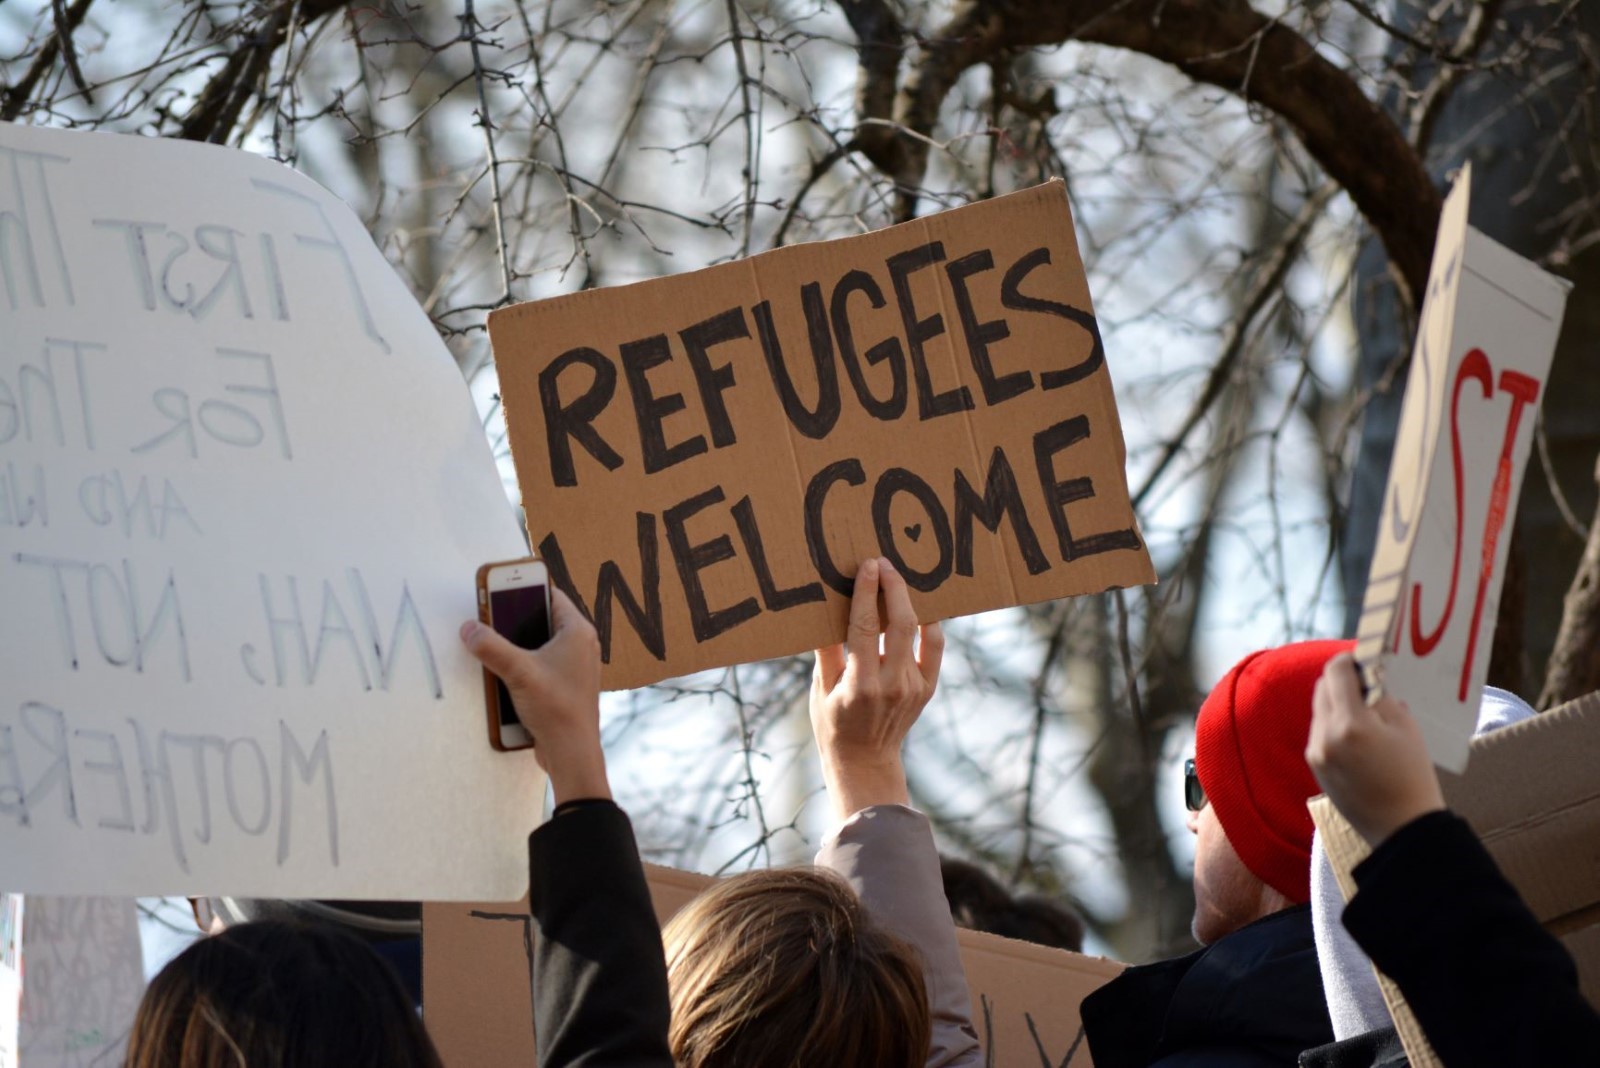 A crowd with signs welcoming refugees